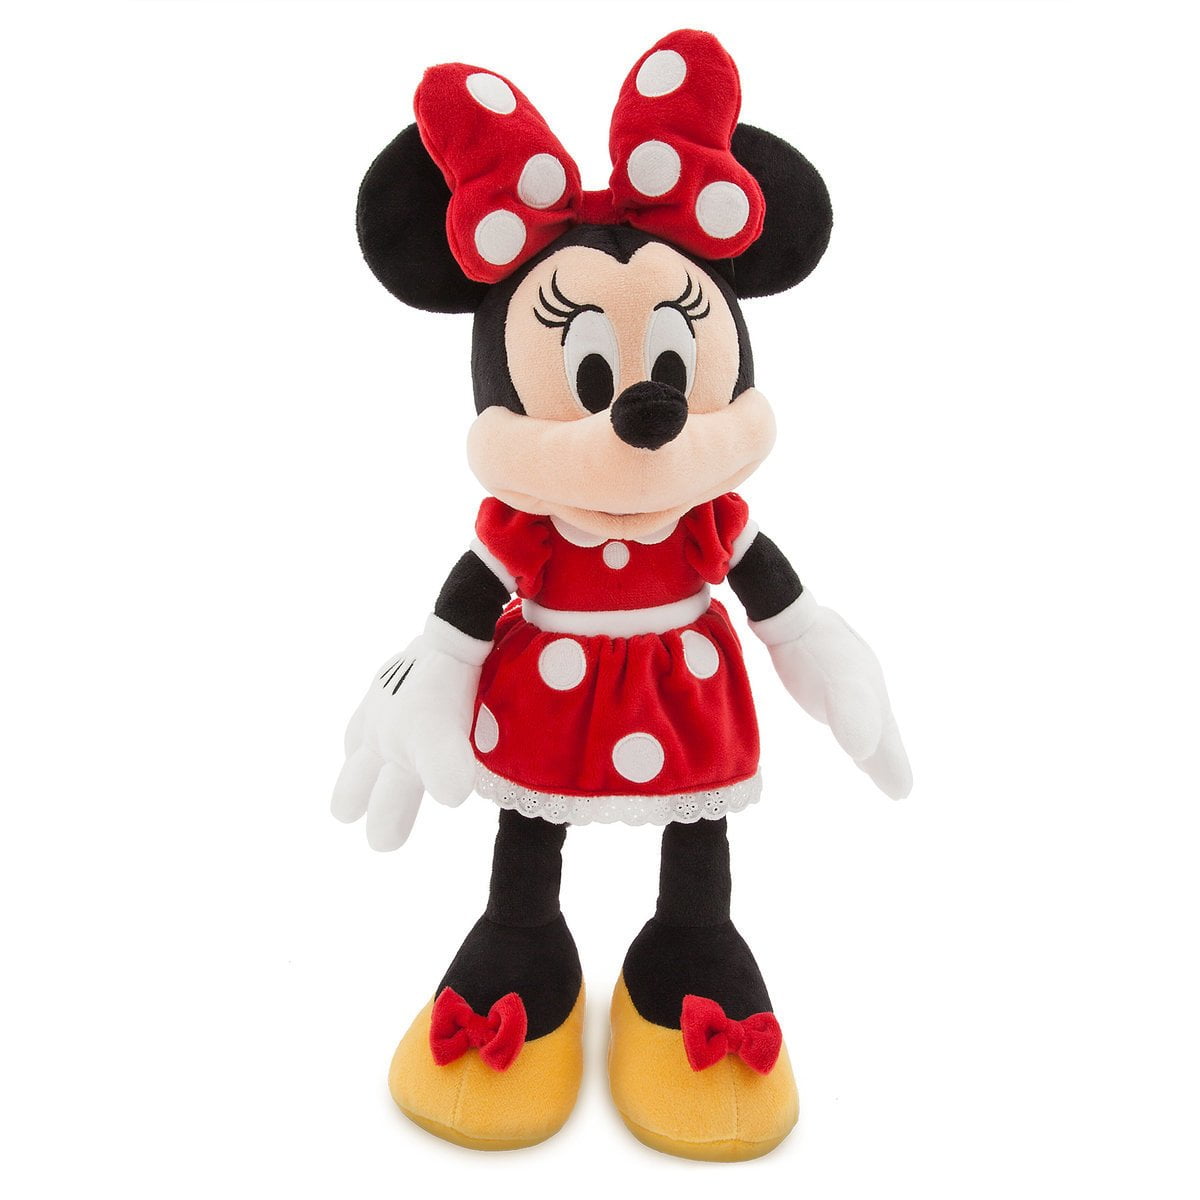 Disney Store Minnie Mouse Plush Red Medium 18 inc New with Tags